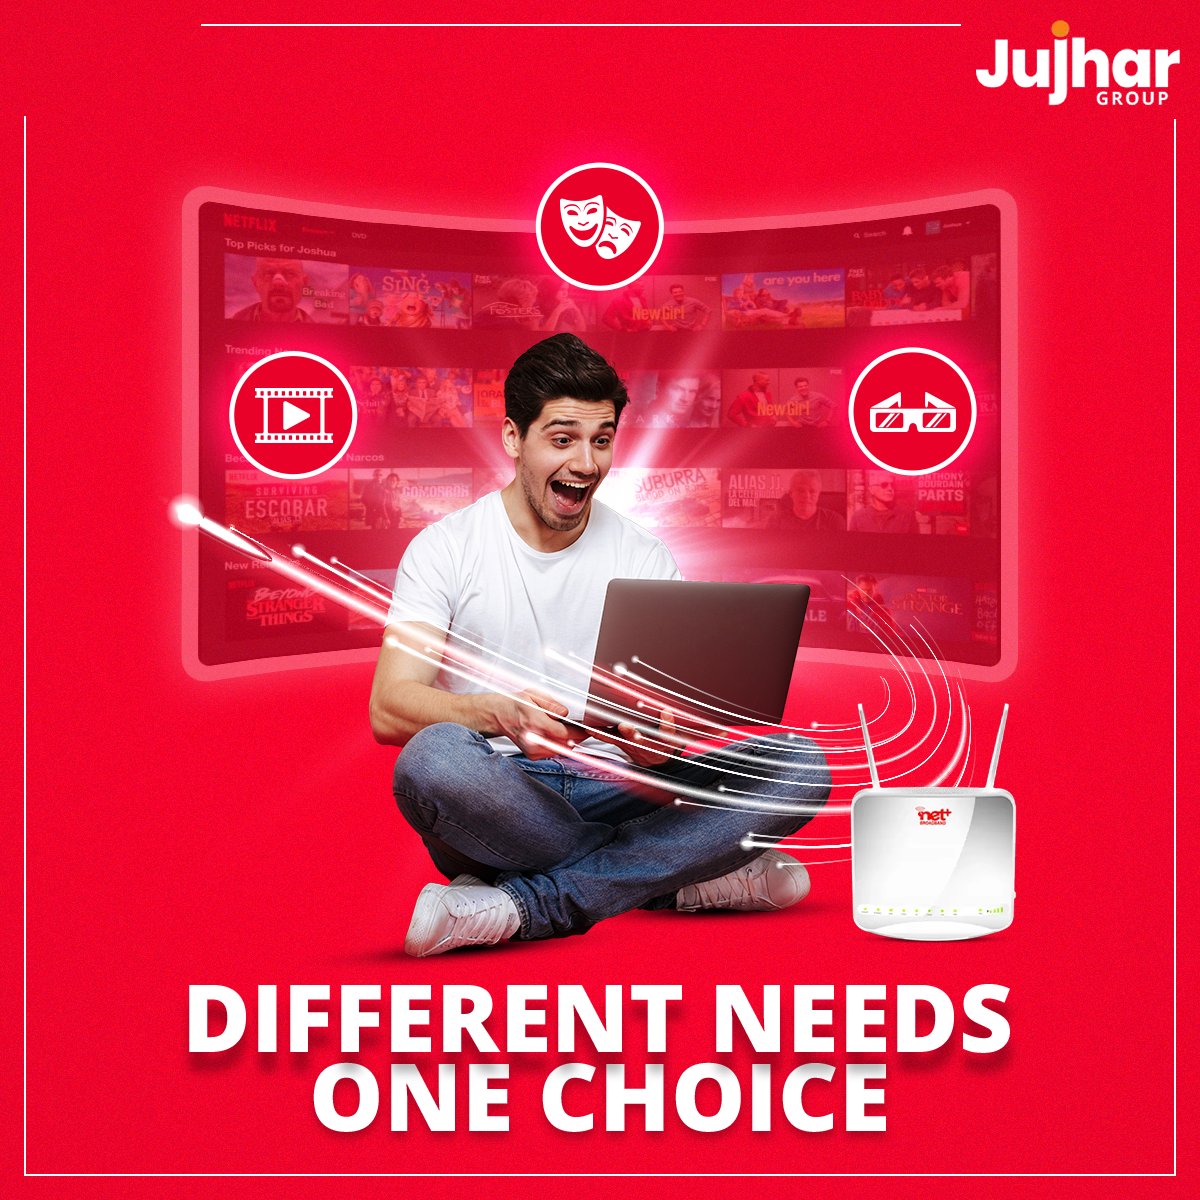 One choice for every need. Experience high-speed internet like never before with Netplus. Join the Netplus family and discover how it can cater to your unique broadband needs.

#netplus #HighSpeedInternet #streammovies #gaming #entertainment #movietime #Salaar #hollywoodmovie